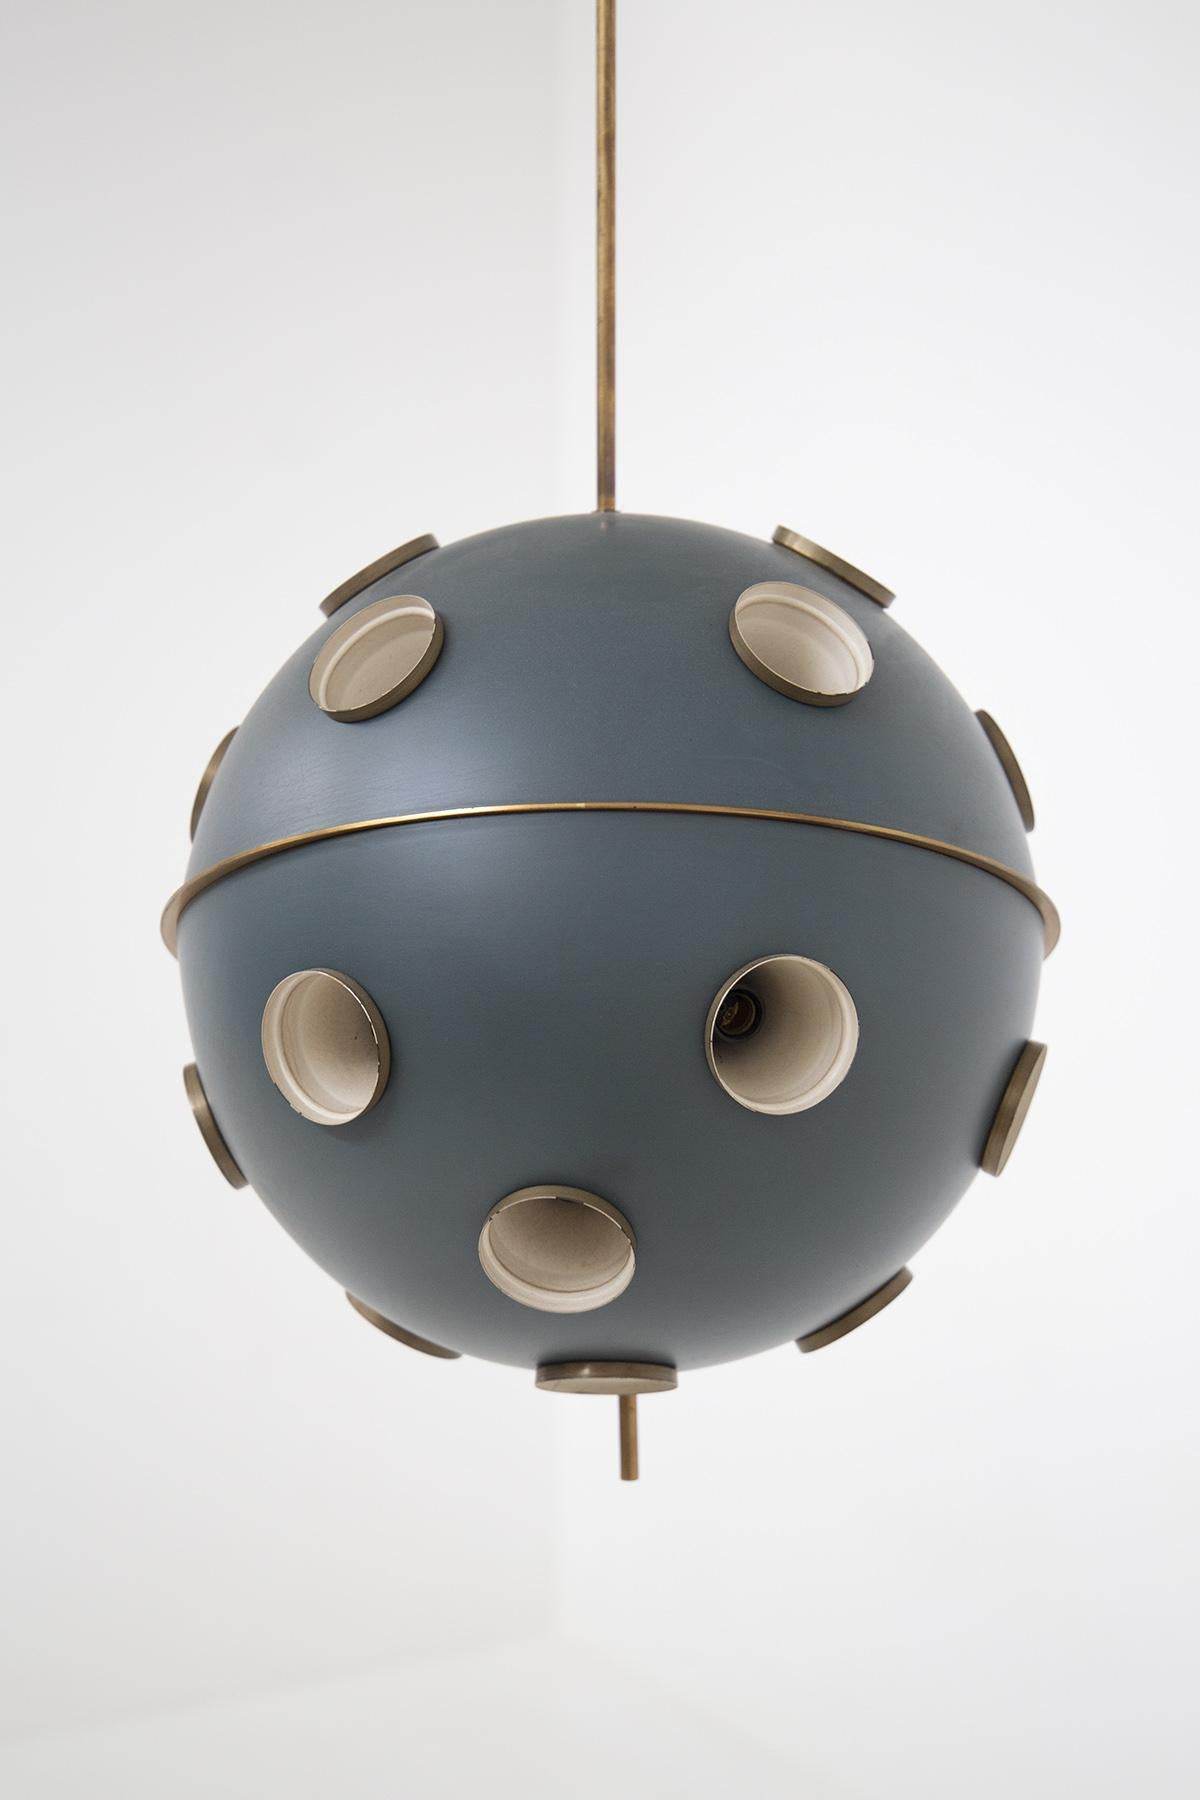 Vintage chandelier designed by Oscar Torlasco in the 1960s for the fine Italian manufacture Lumi.
The ceiling lamp has a spherical shape in blue painted aluminum and patinated brass mechanisms.
The globe chandelier is very decorative and